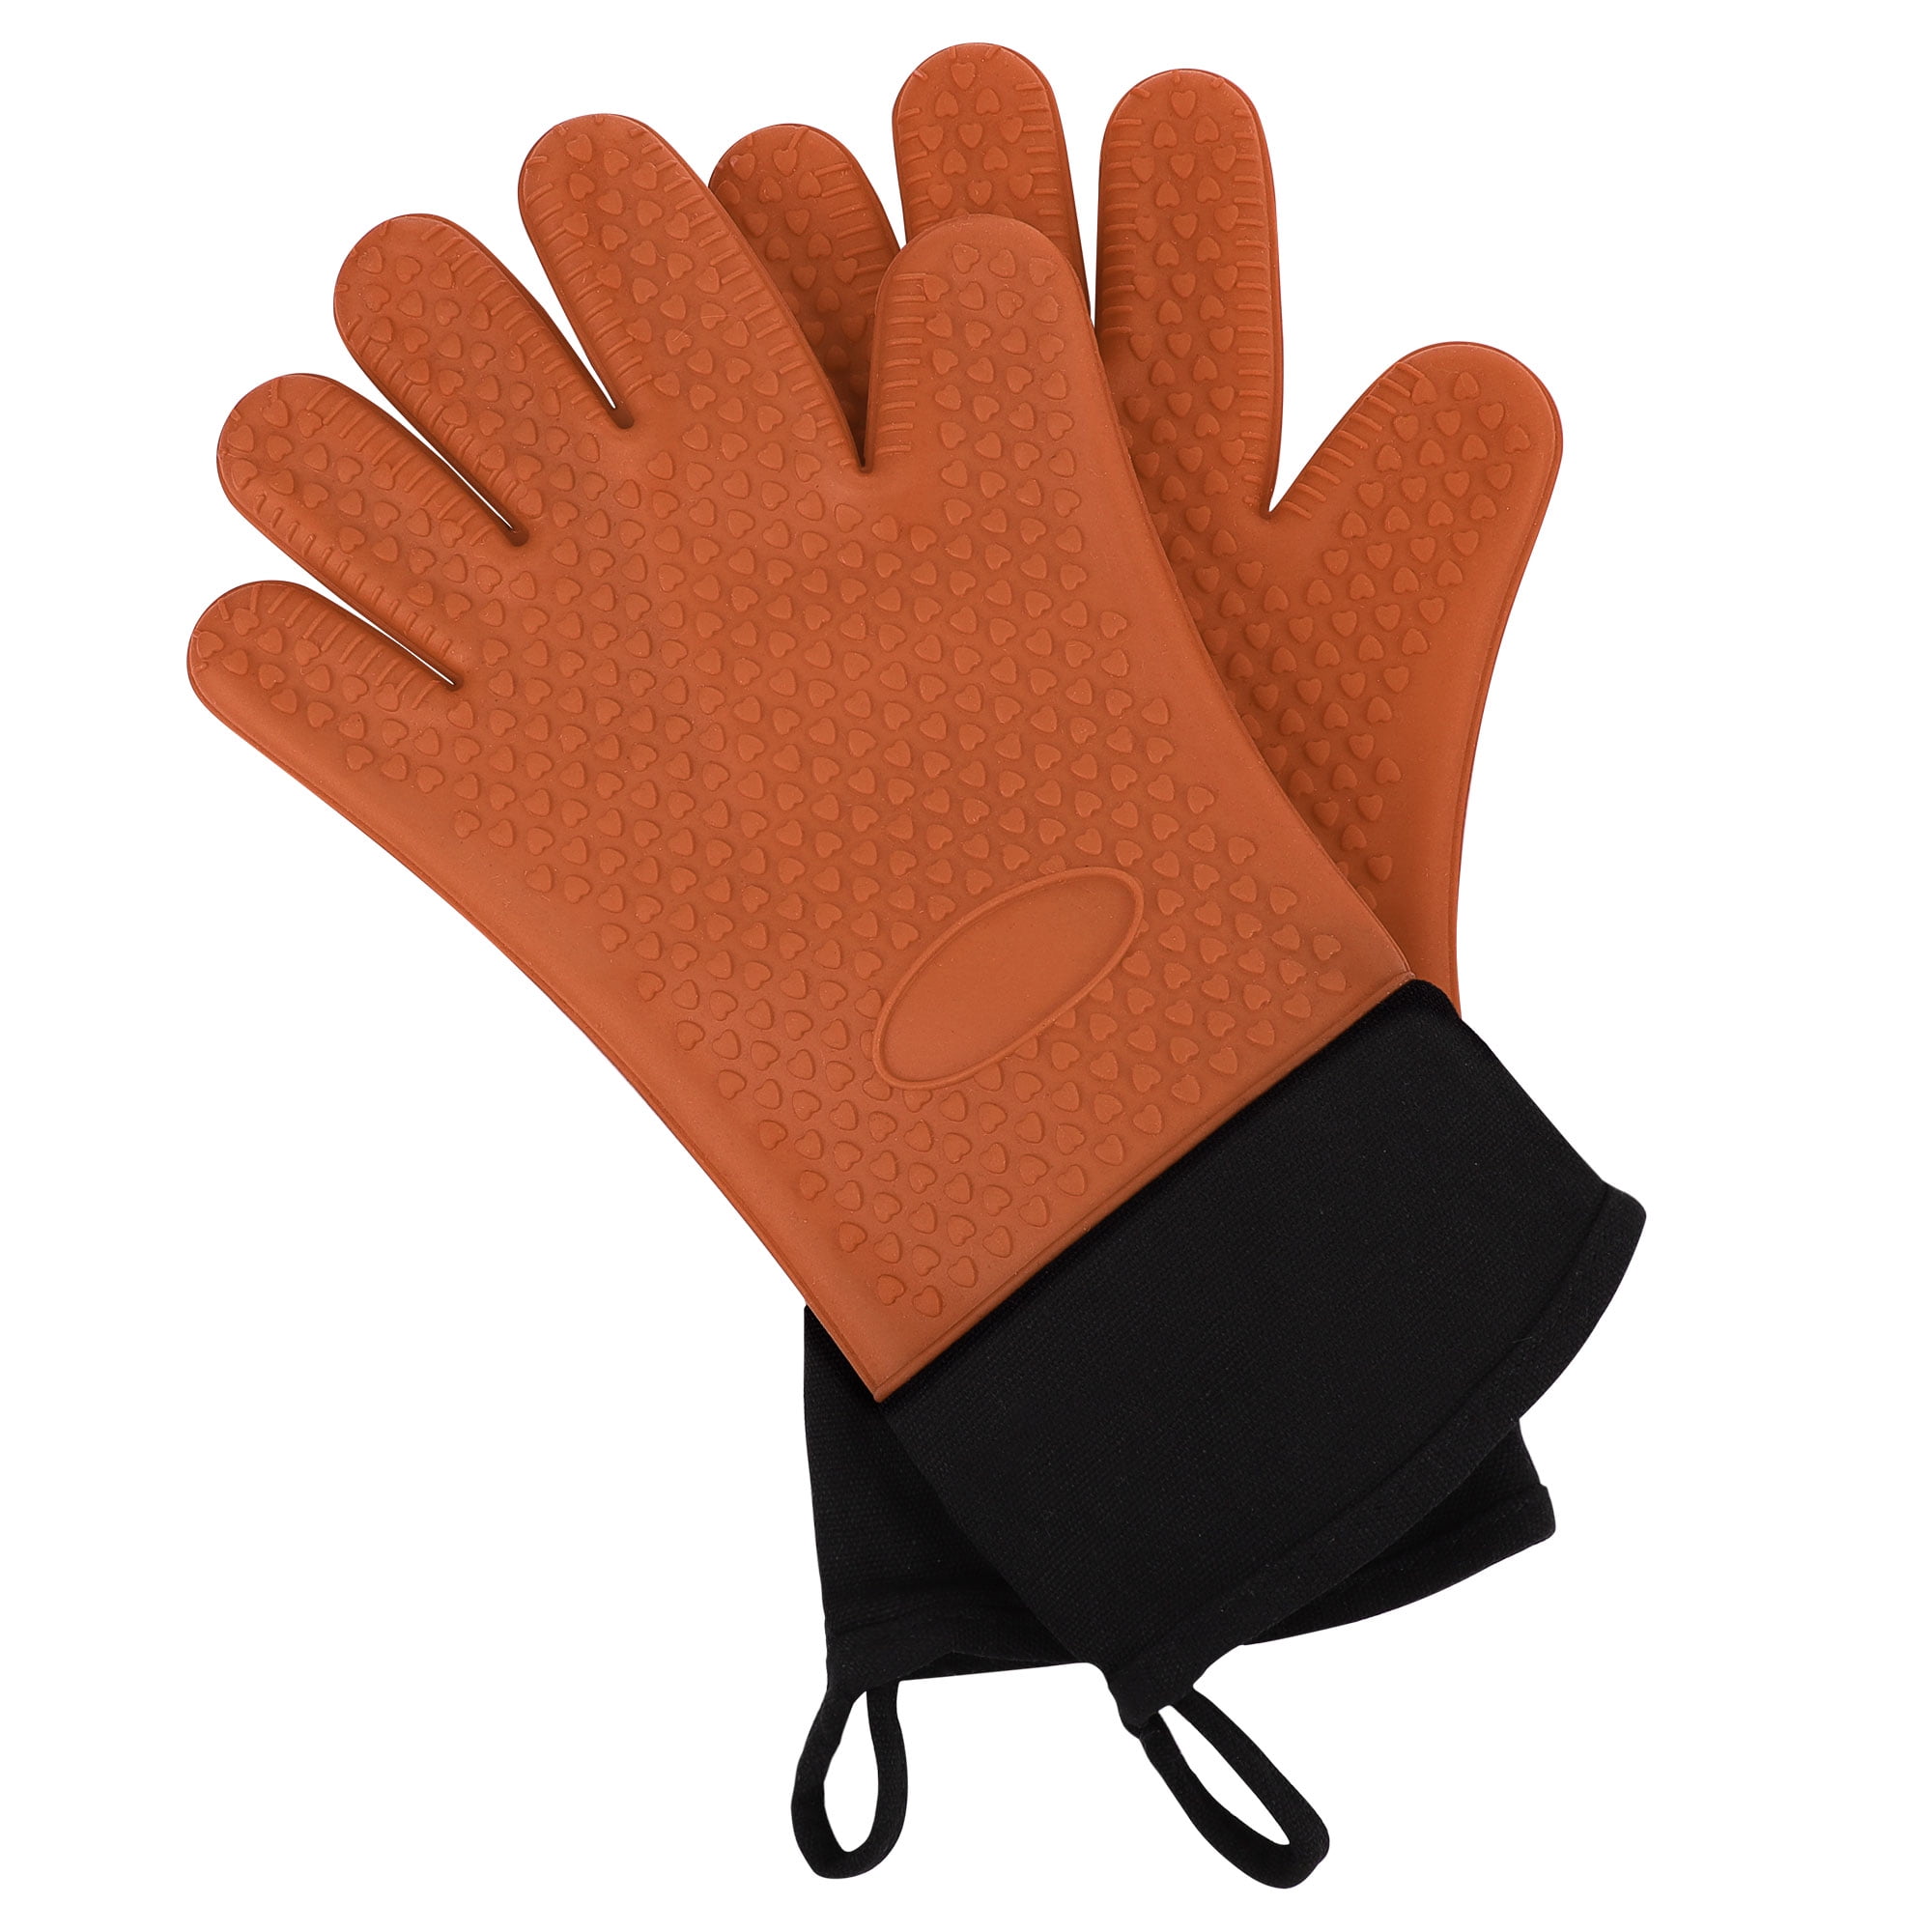 Uxcell Silicone Oven Mitts Heatproof Gloves 1 Pair Orange